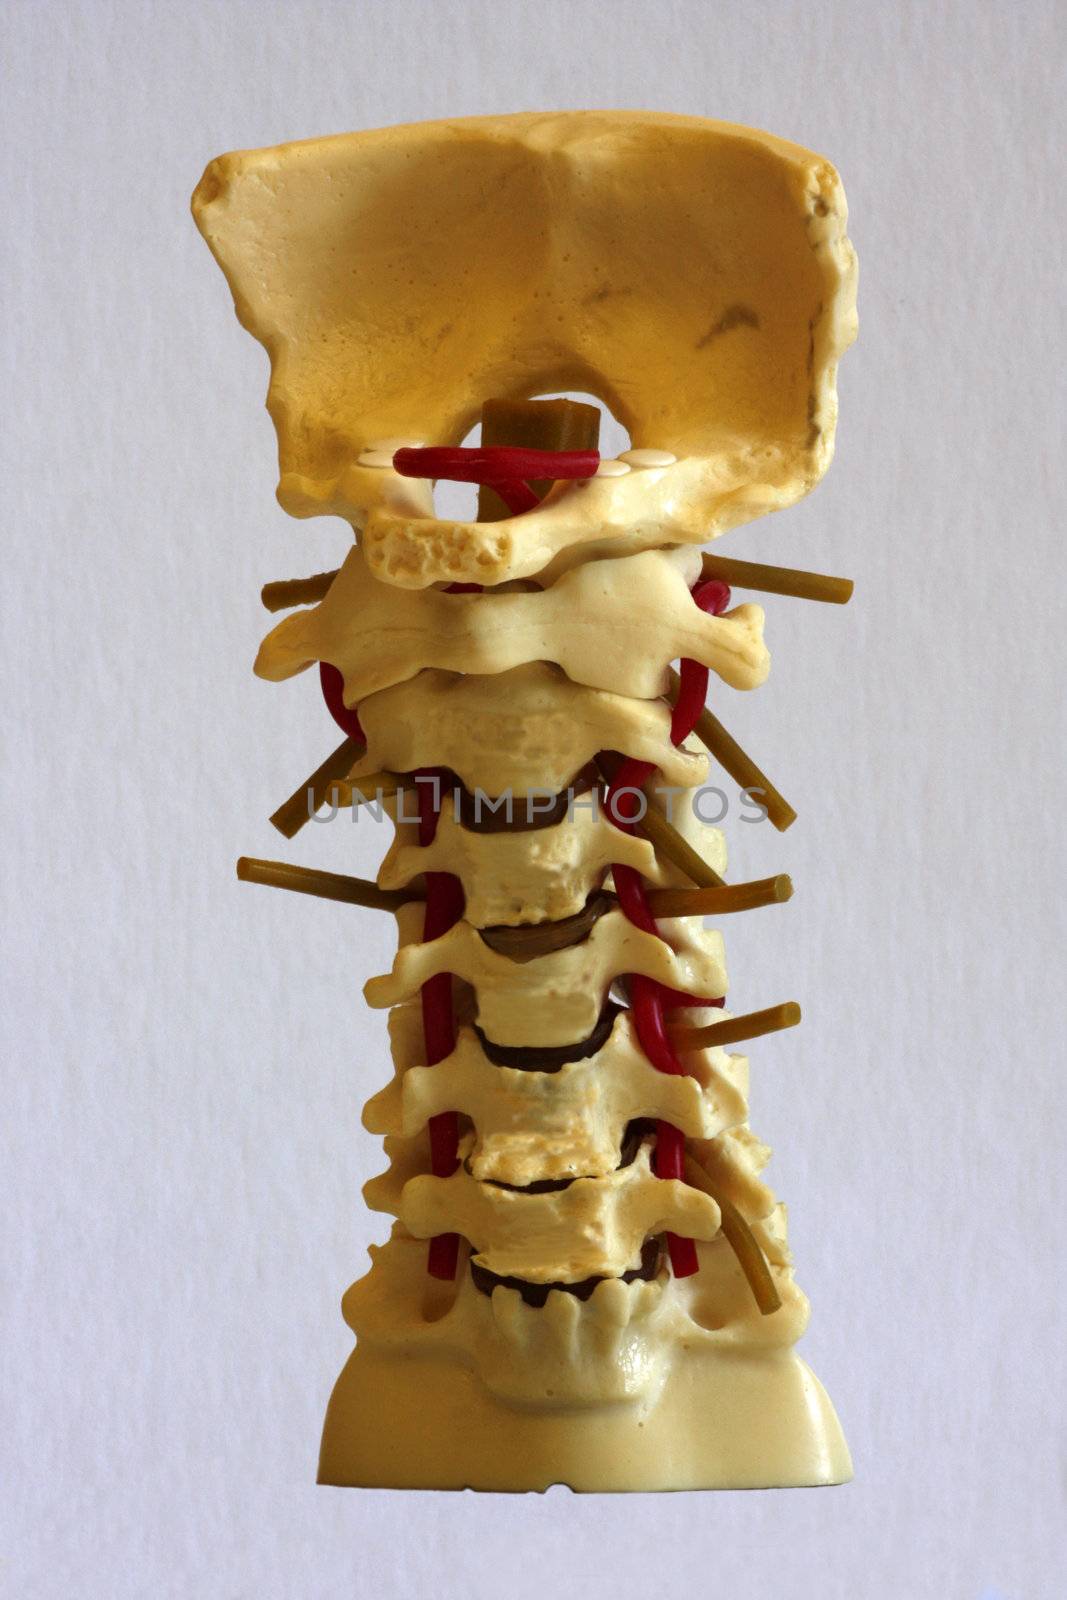 Model of a human spine